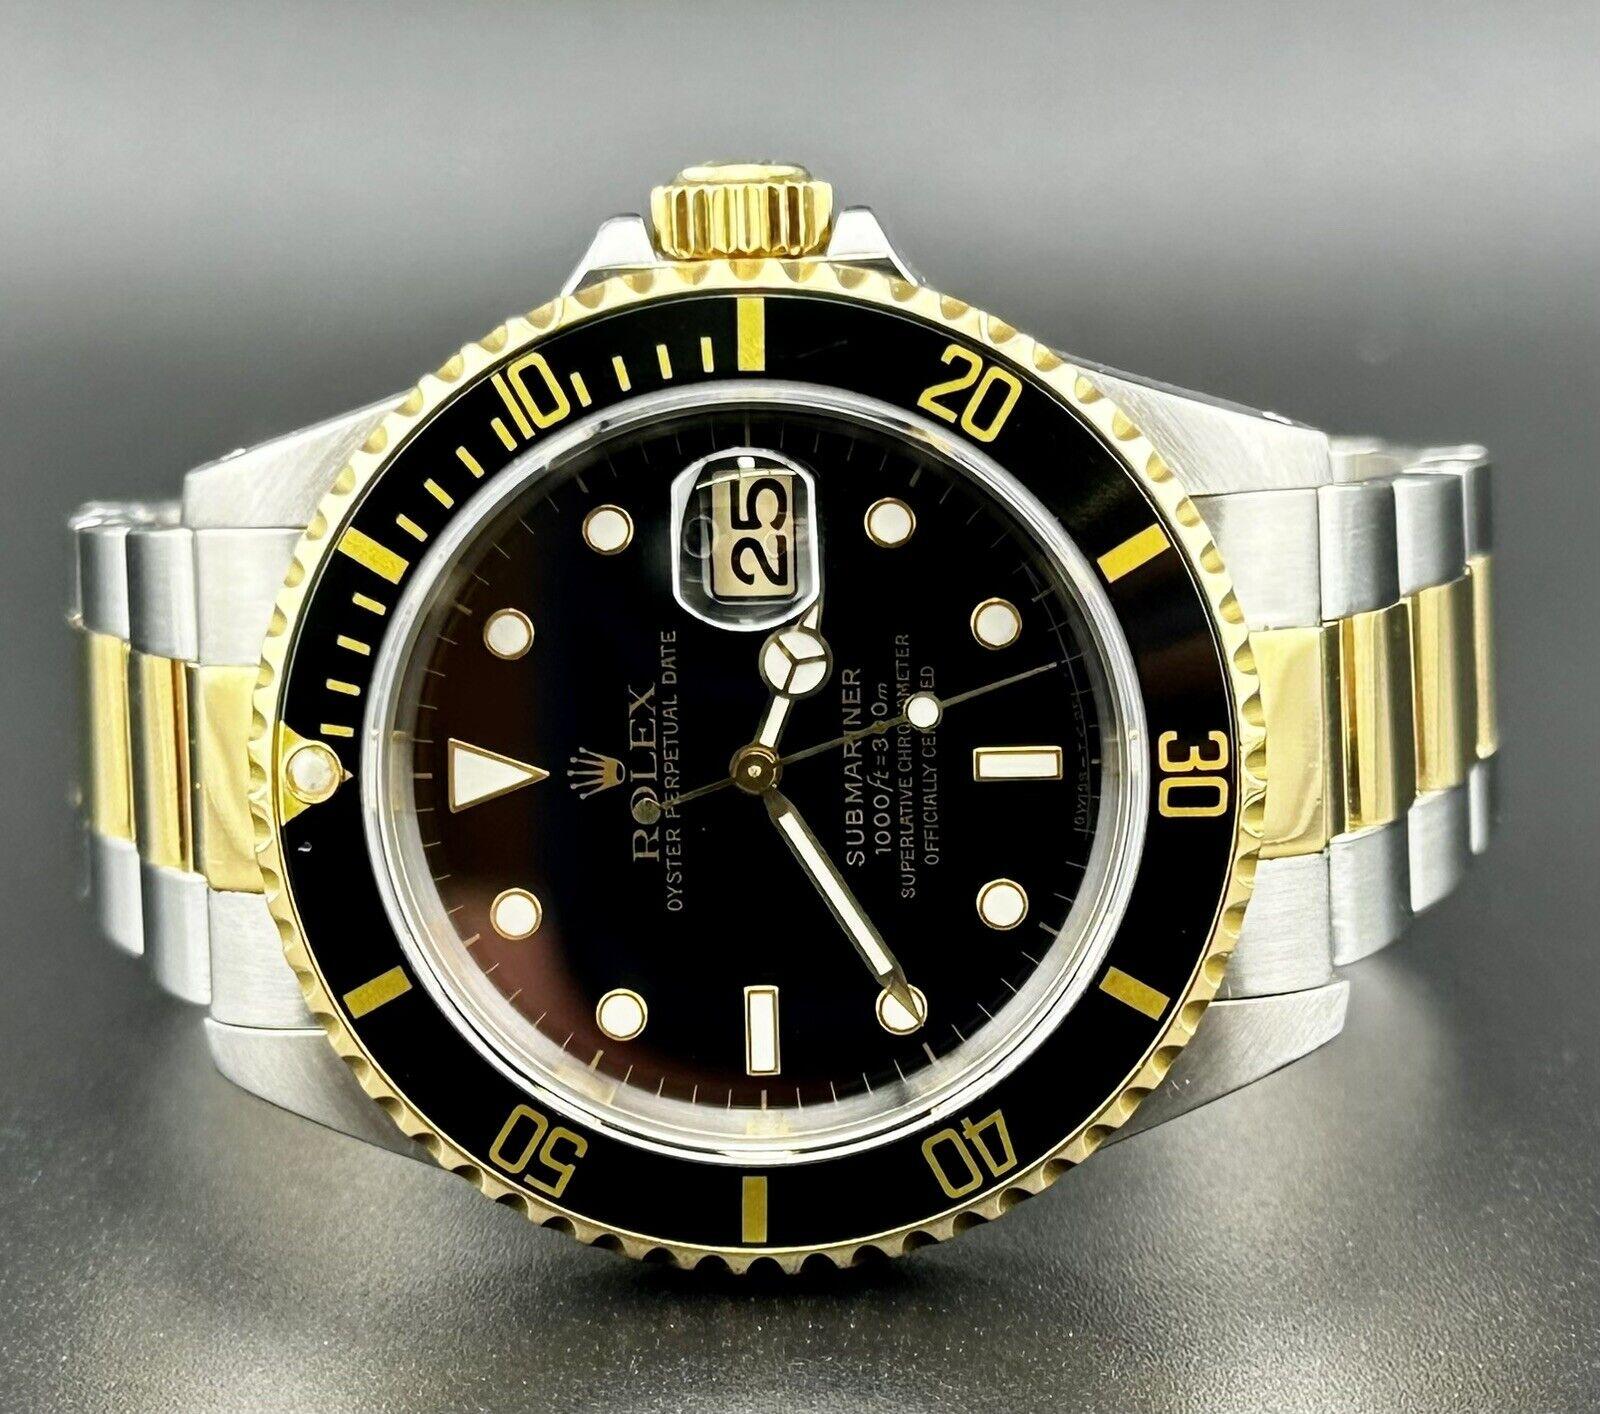 Rolex Submariner 40mm. A Pre Owned Watch with Original Box and Papers. Watch is 100% Authentic and Comes with Swiss Ice Authenticity Card. Watch Reference is 16613 and is in Great Condition. Dial Color is Black and Material 18k Yellow Gold and